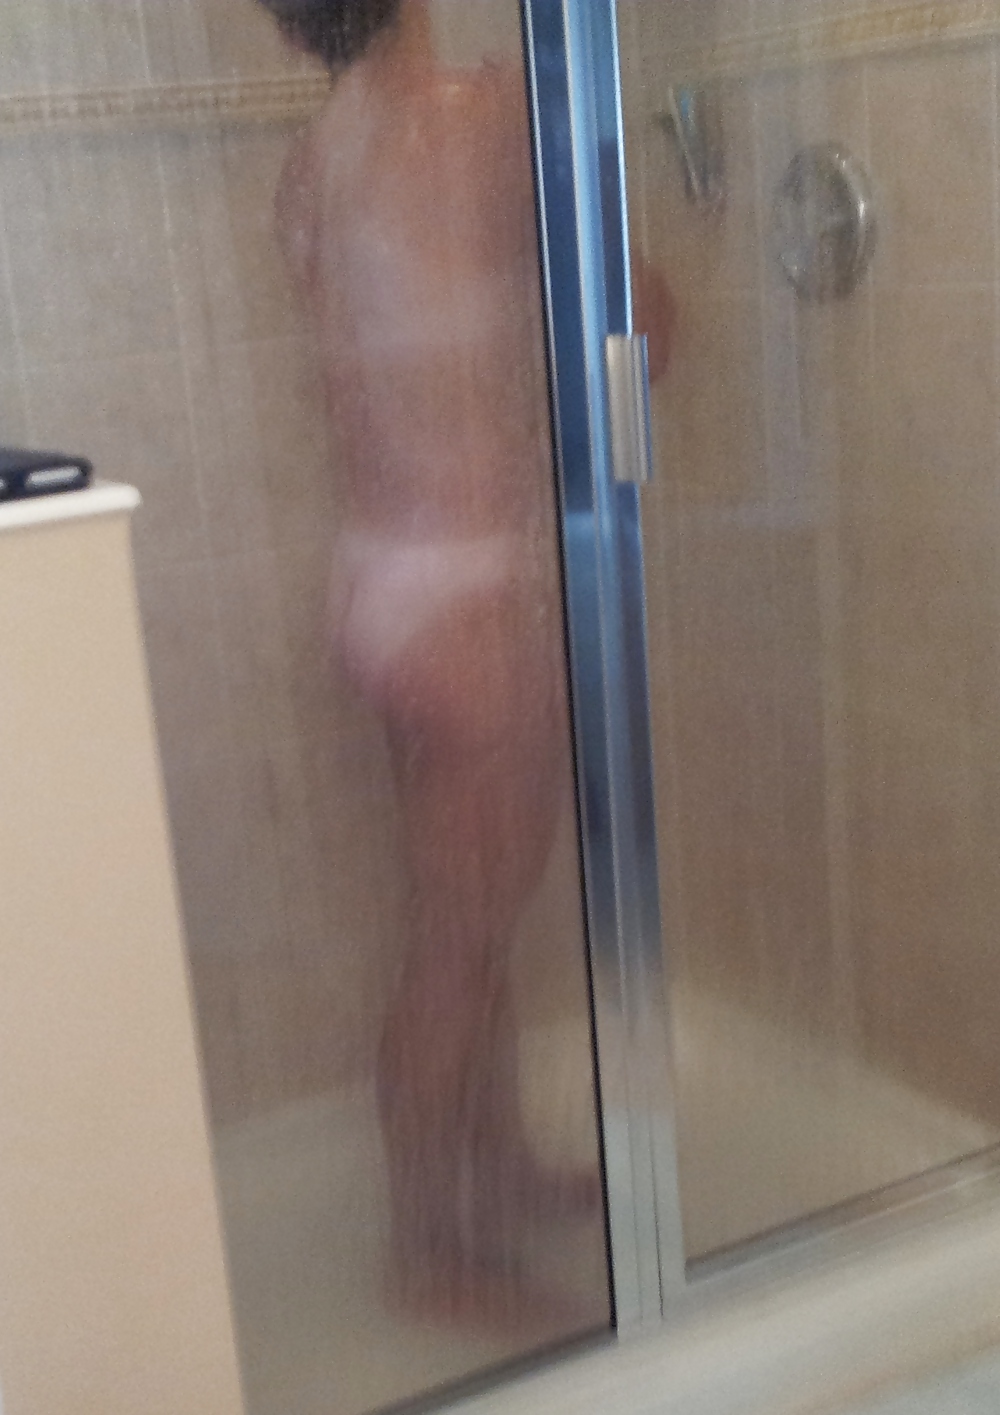 More shower photos of my wife 2 #20212952